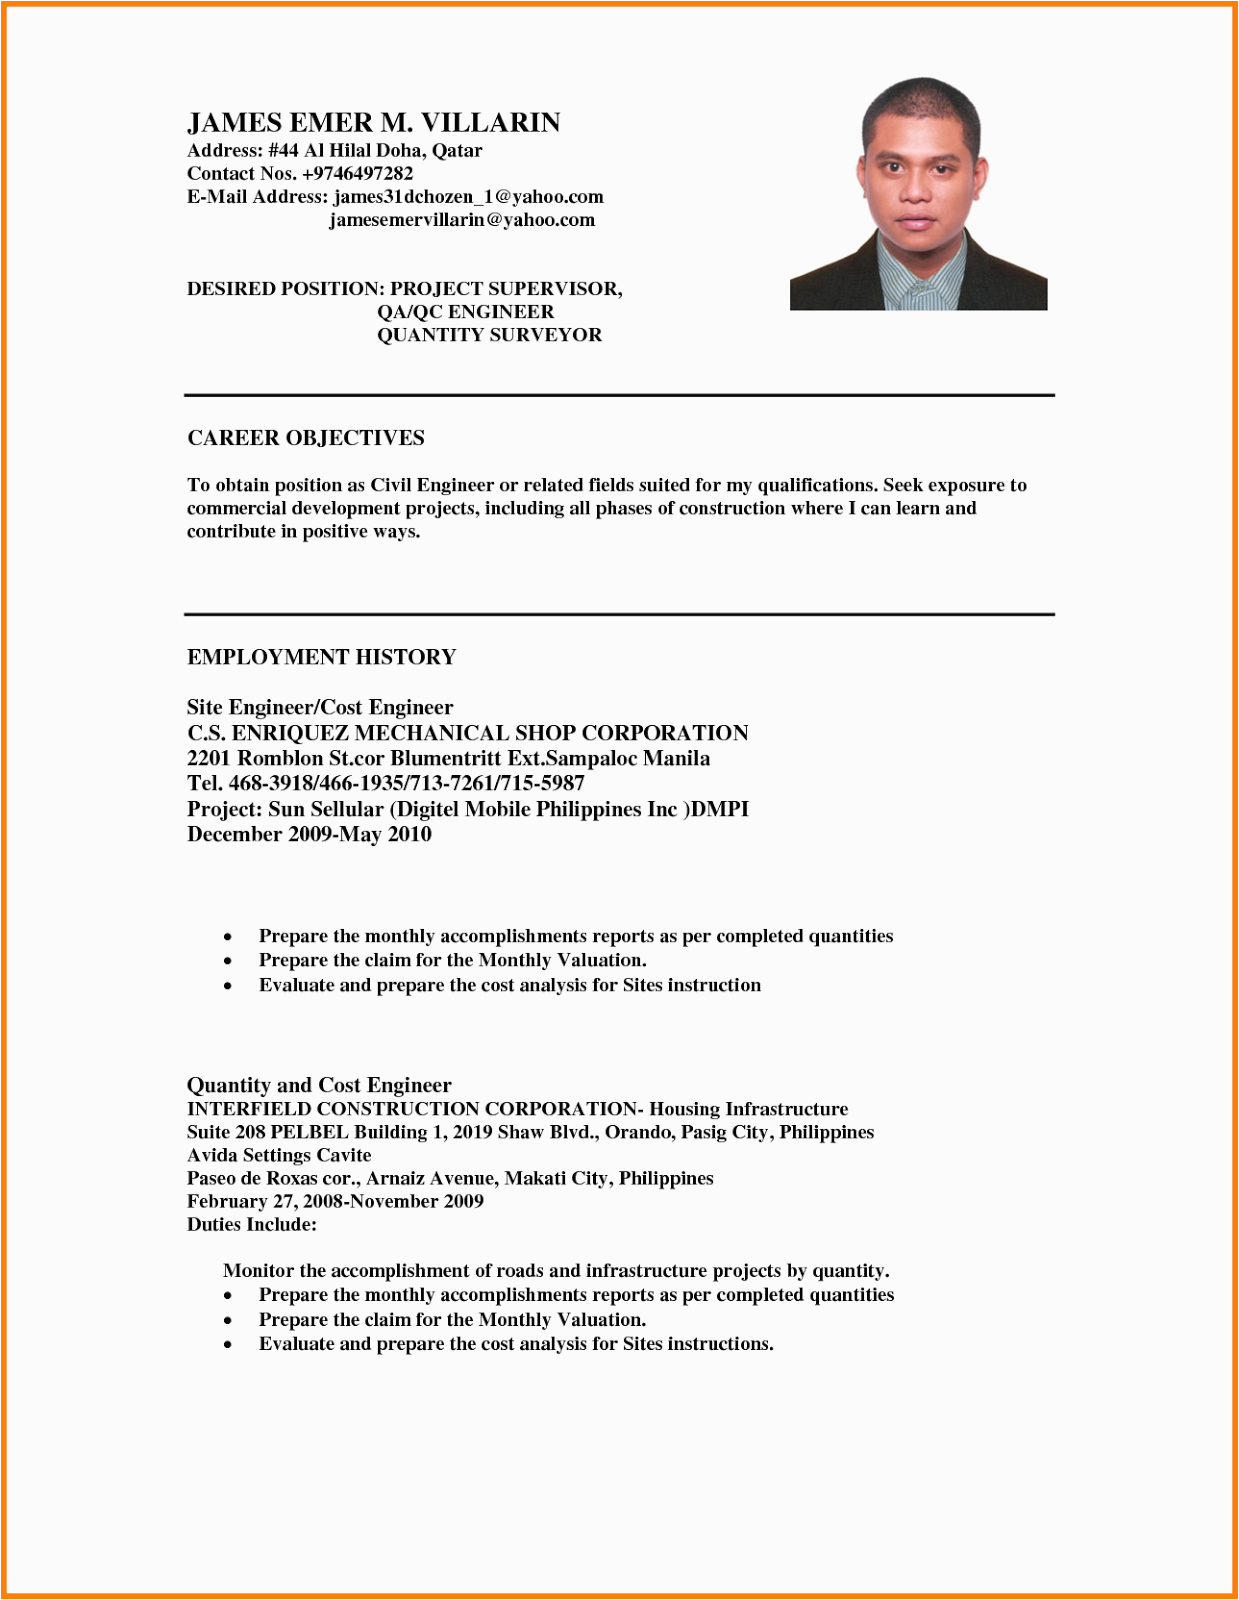 Resume Sample for Ojt Engineering Students Ojt Resume Sample Philippin News Collections